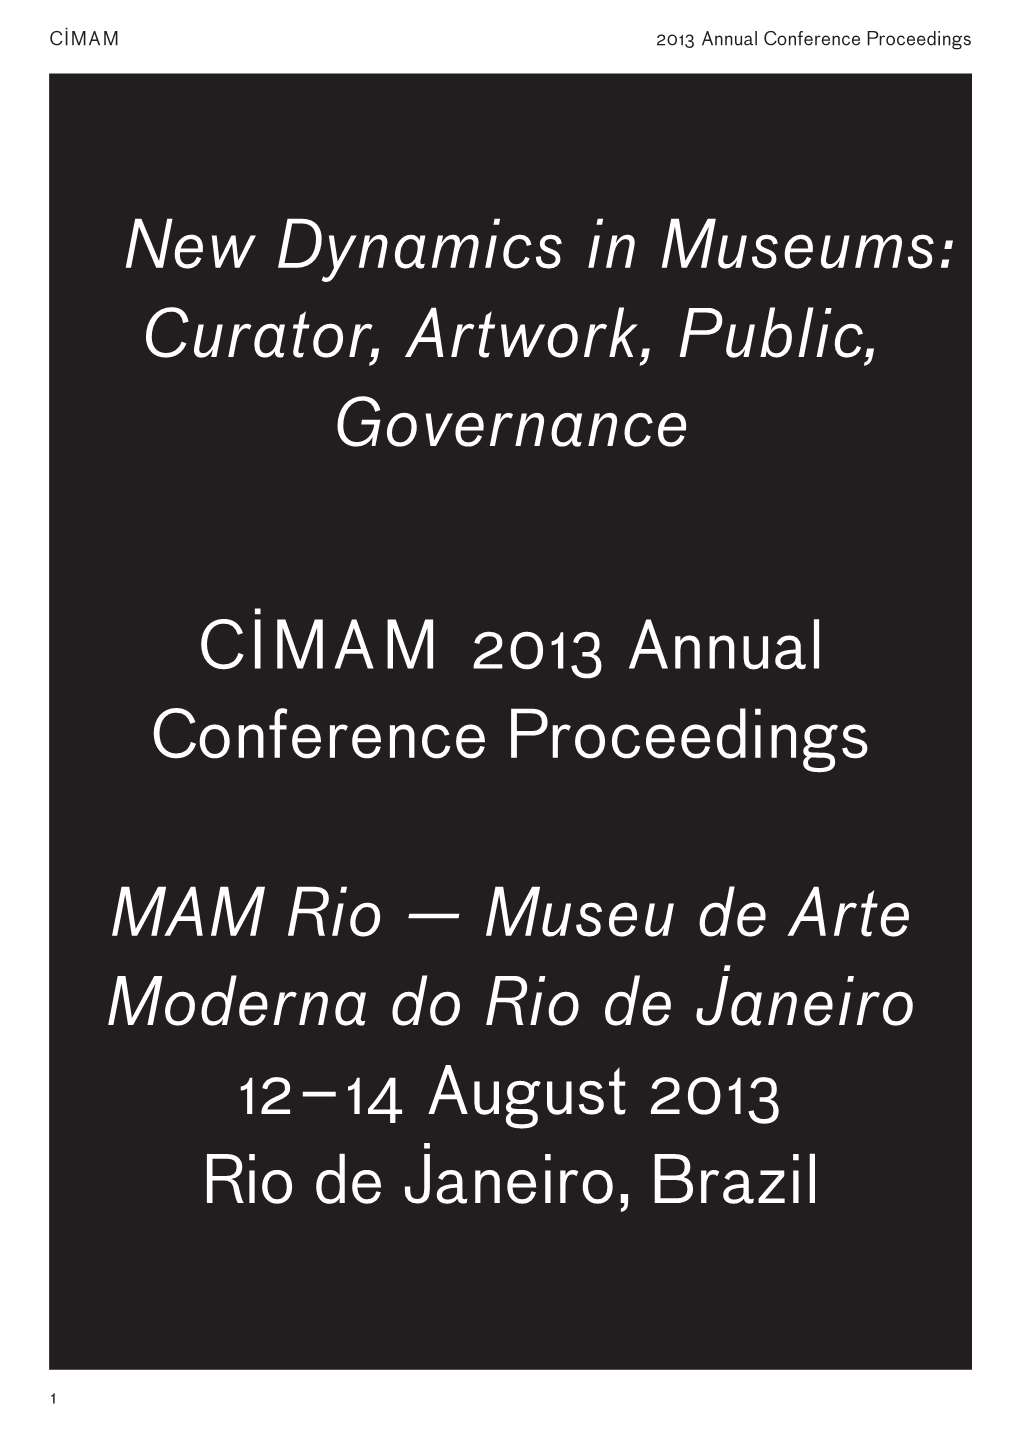 New Dynamics in Museums: Curator, Artwork, Public, Governance